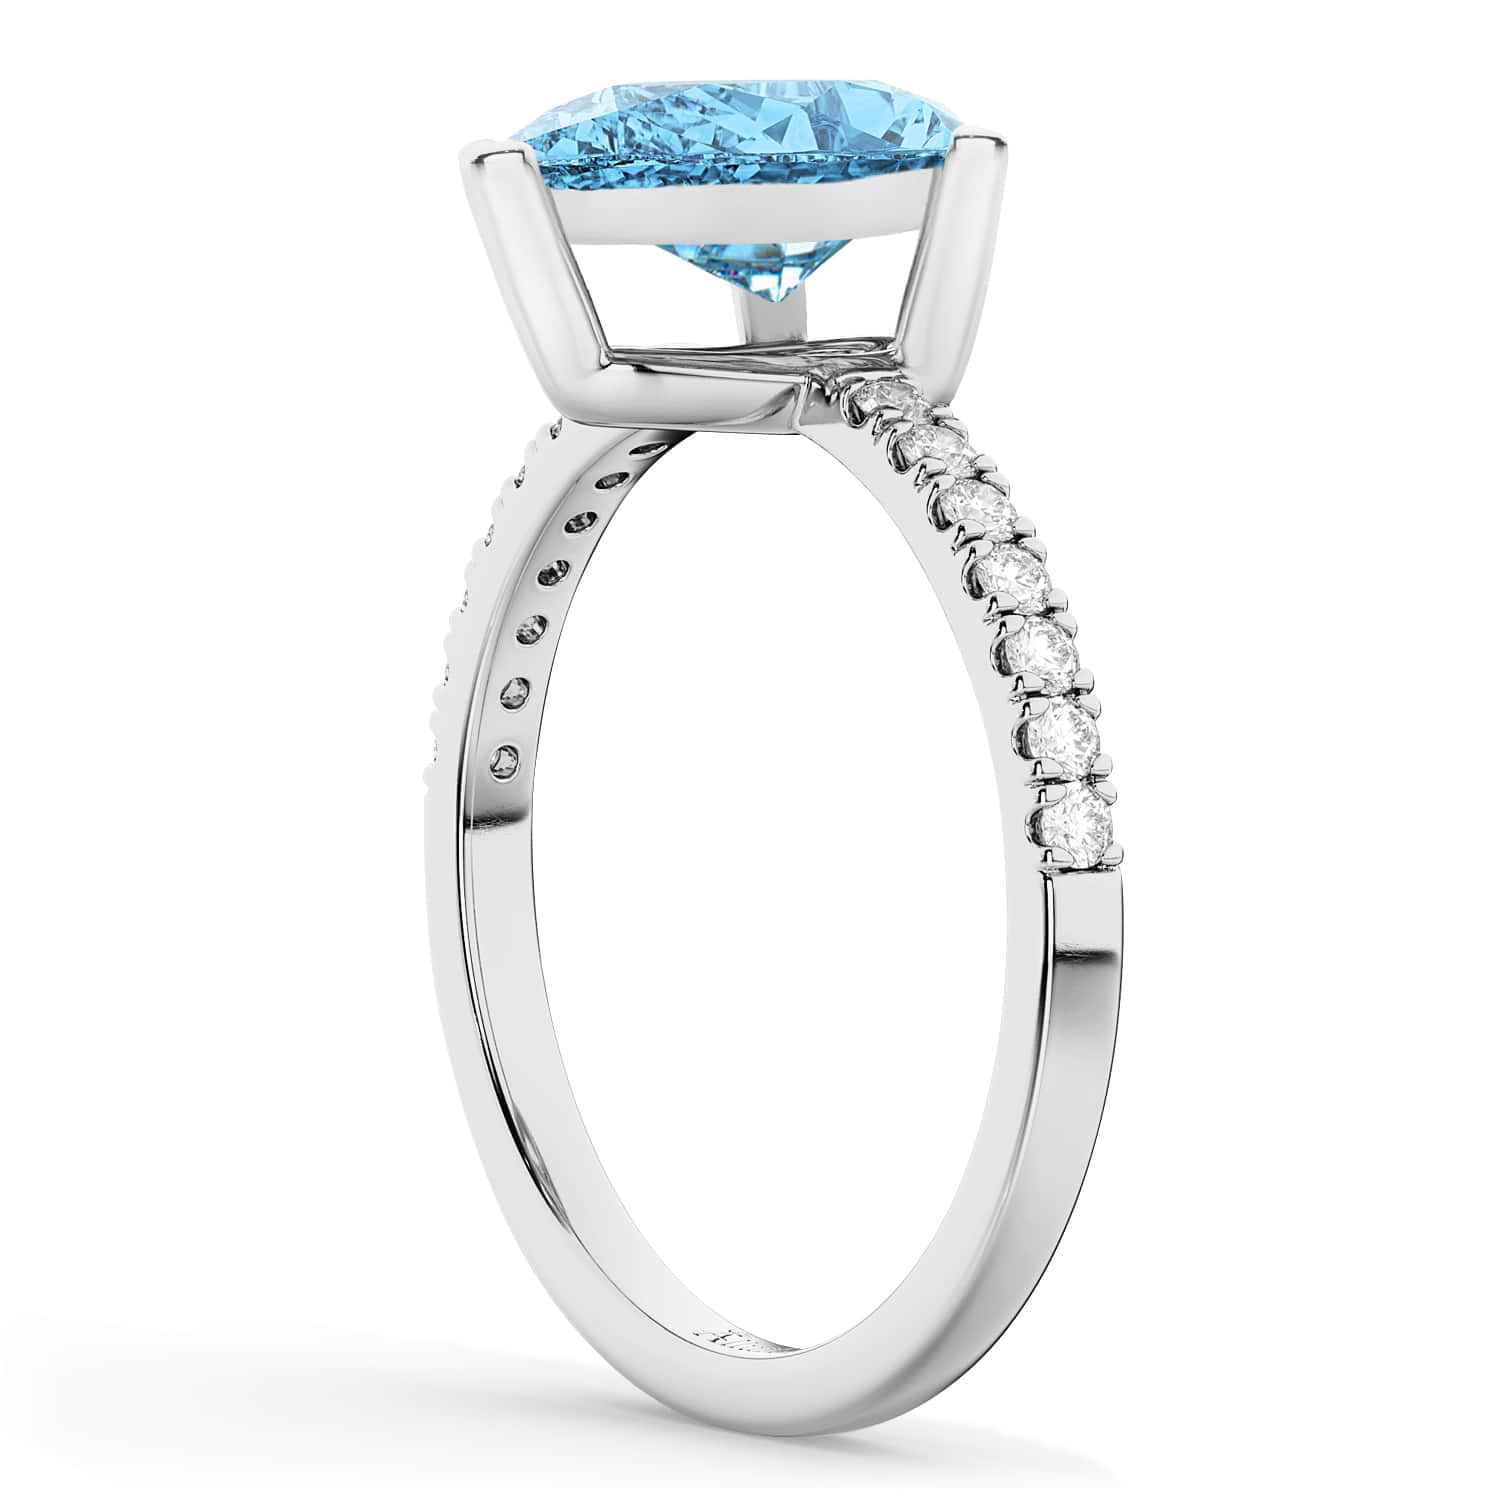 Pear Cut Sidestone Accented Blue Topaz & Diamond Engagement Ring 14K White Gold 1.61ct